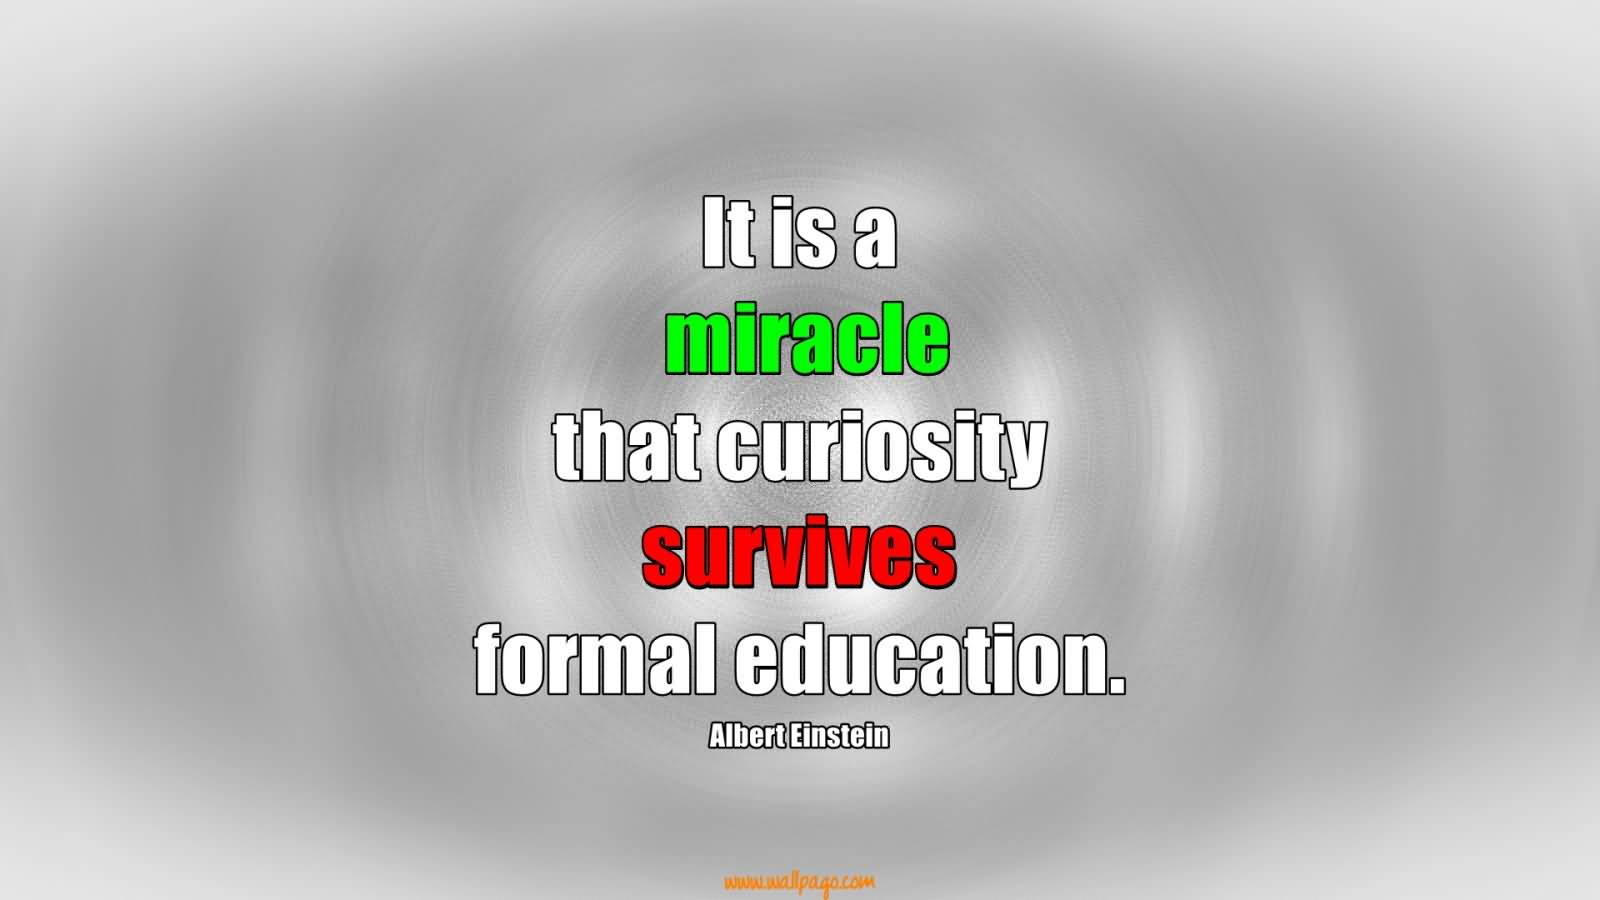 It is a miracle that curiosity survives formal education - Albert Einstein